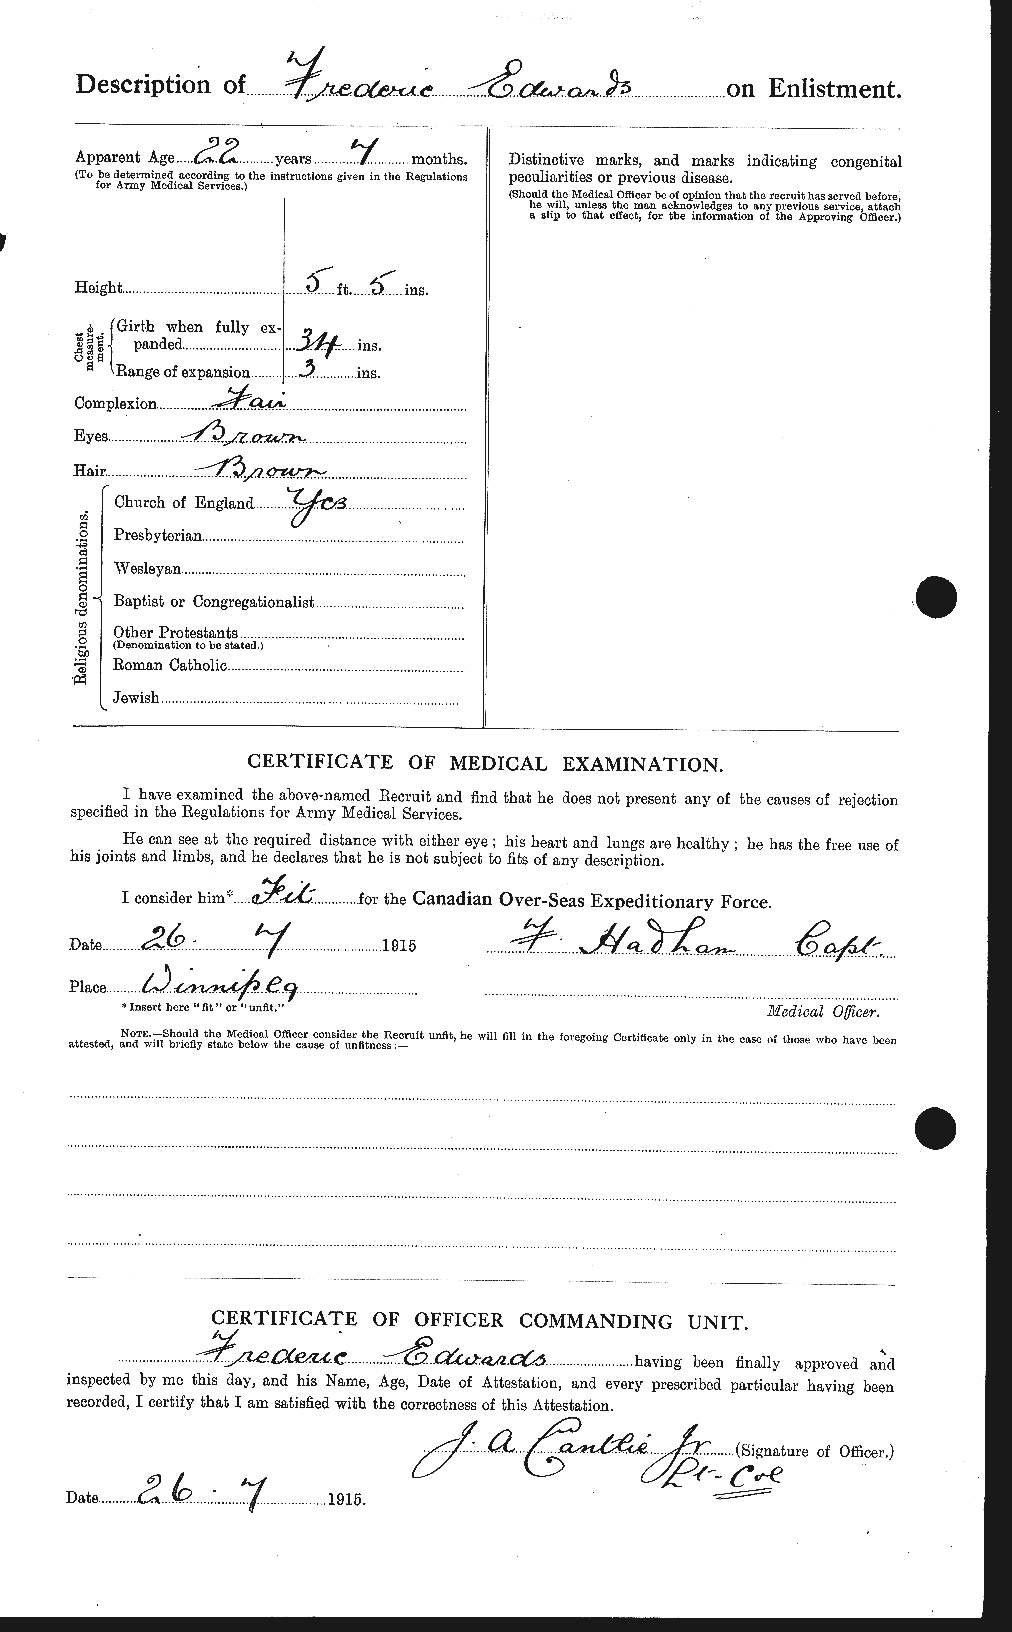 Personnel Records of the First World War - CEF 309063b